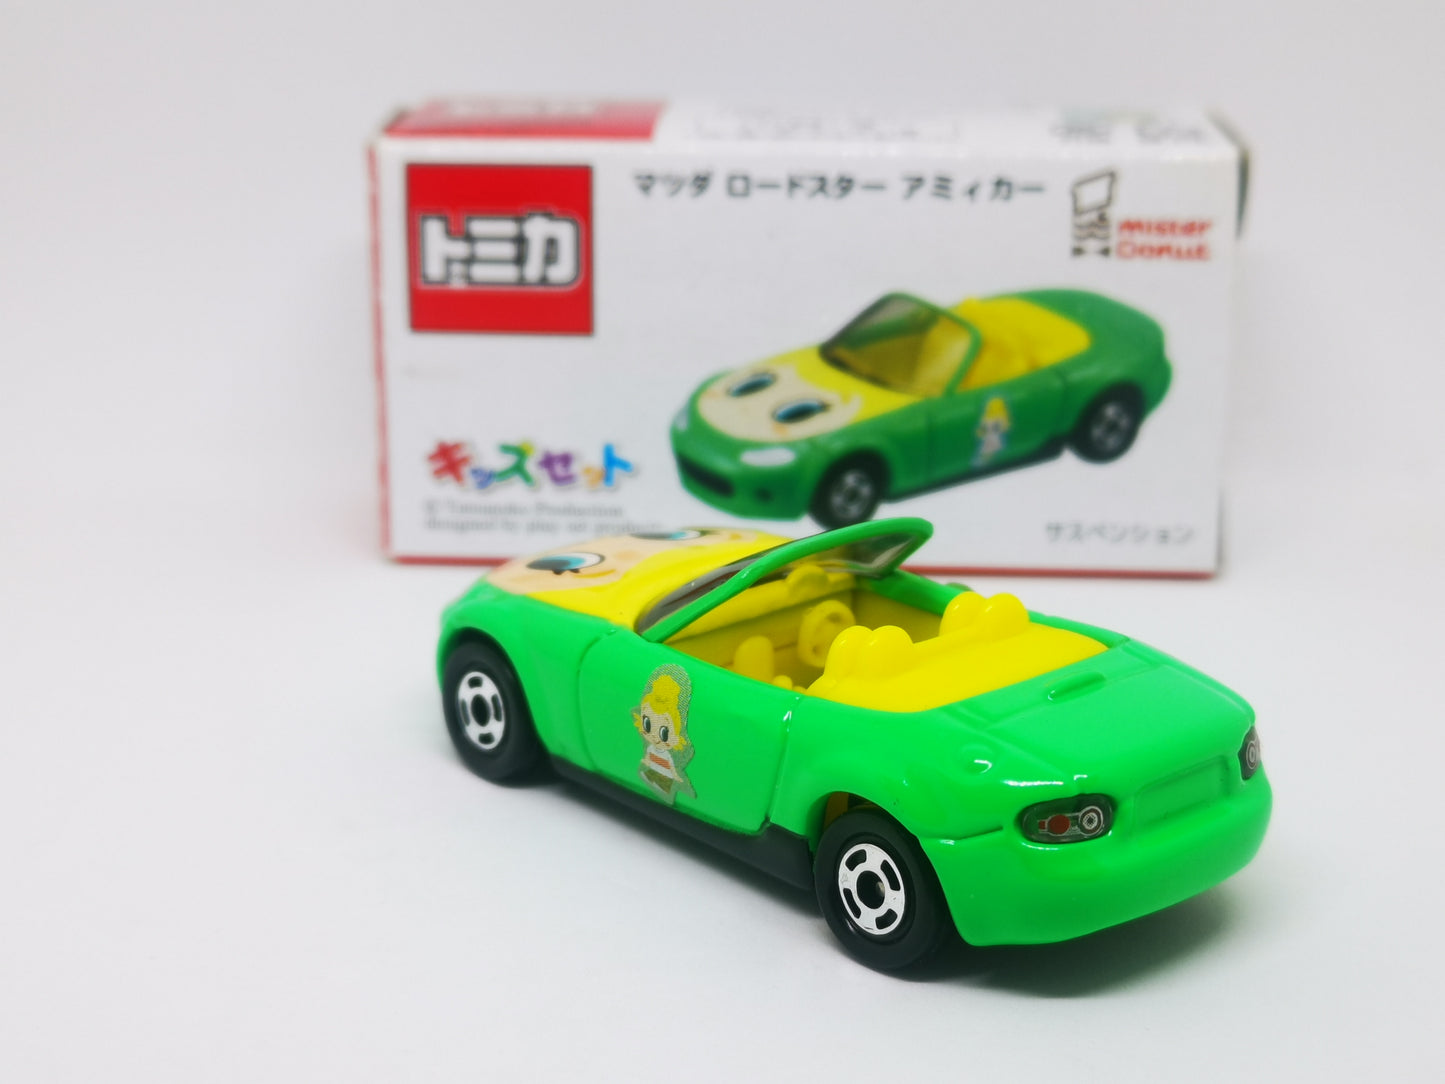 Tomica X Mister Donut exclusive Mazda MX-5 Roadster NC